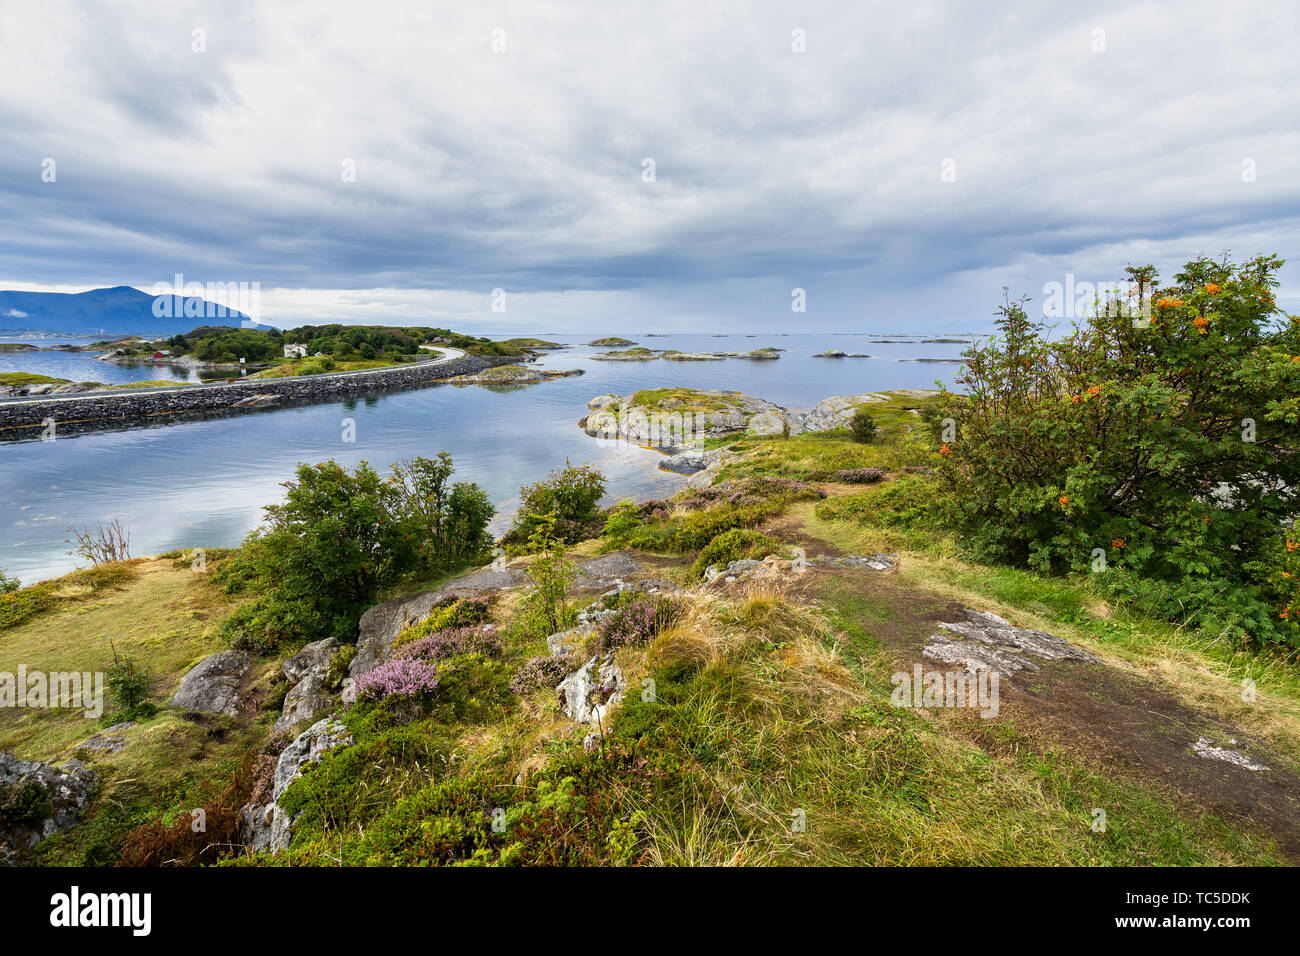 A small island near the Atlantic Road (Atlanterhavsveien), an iconic tourist attraction and popular site to film automotive commercials, Norway Stock Photo